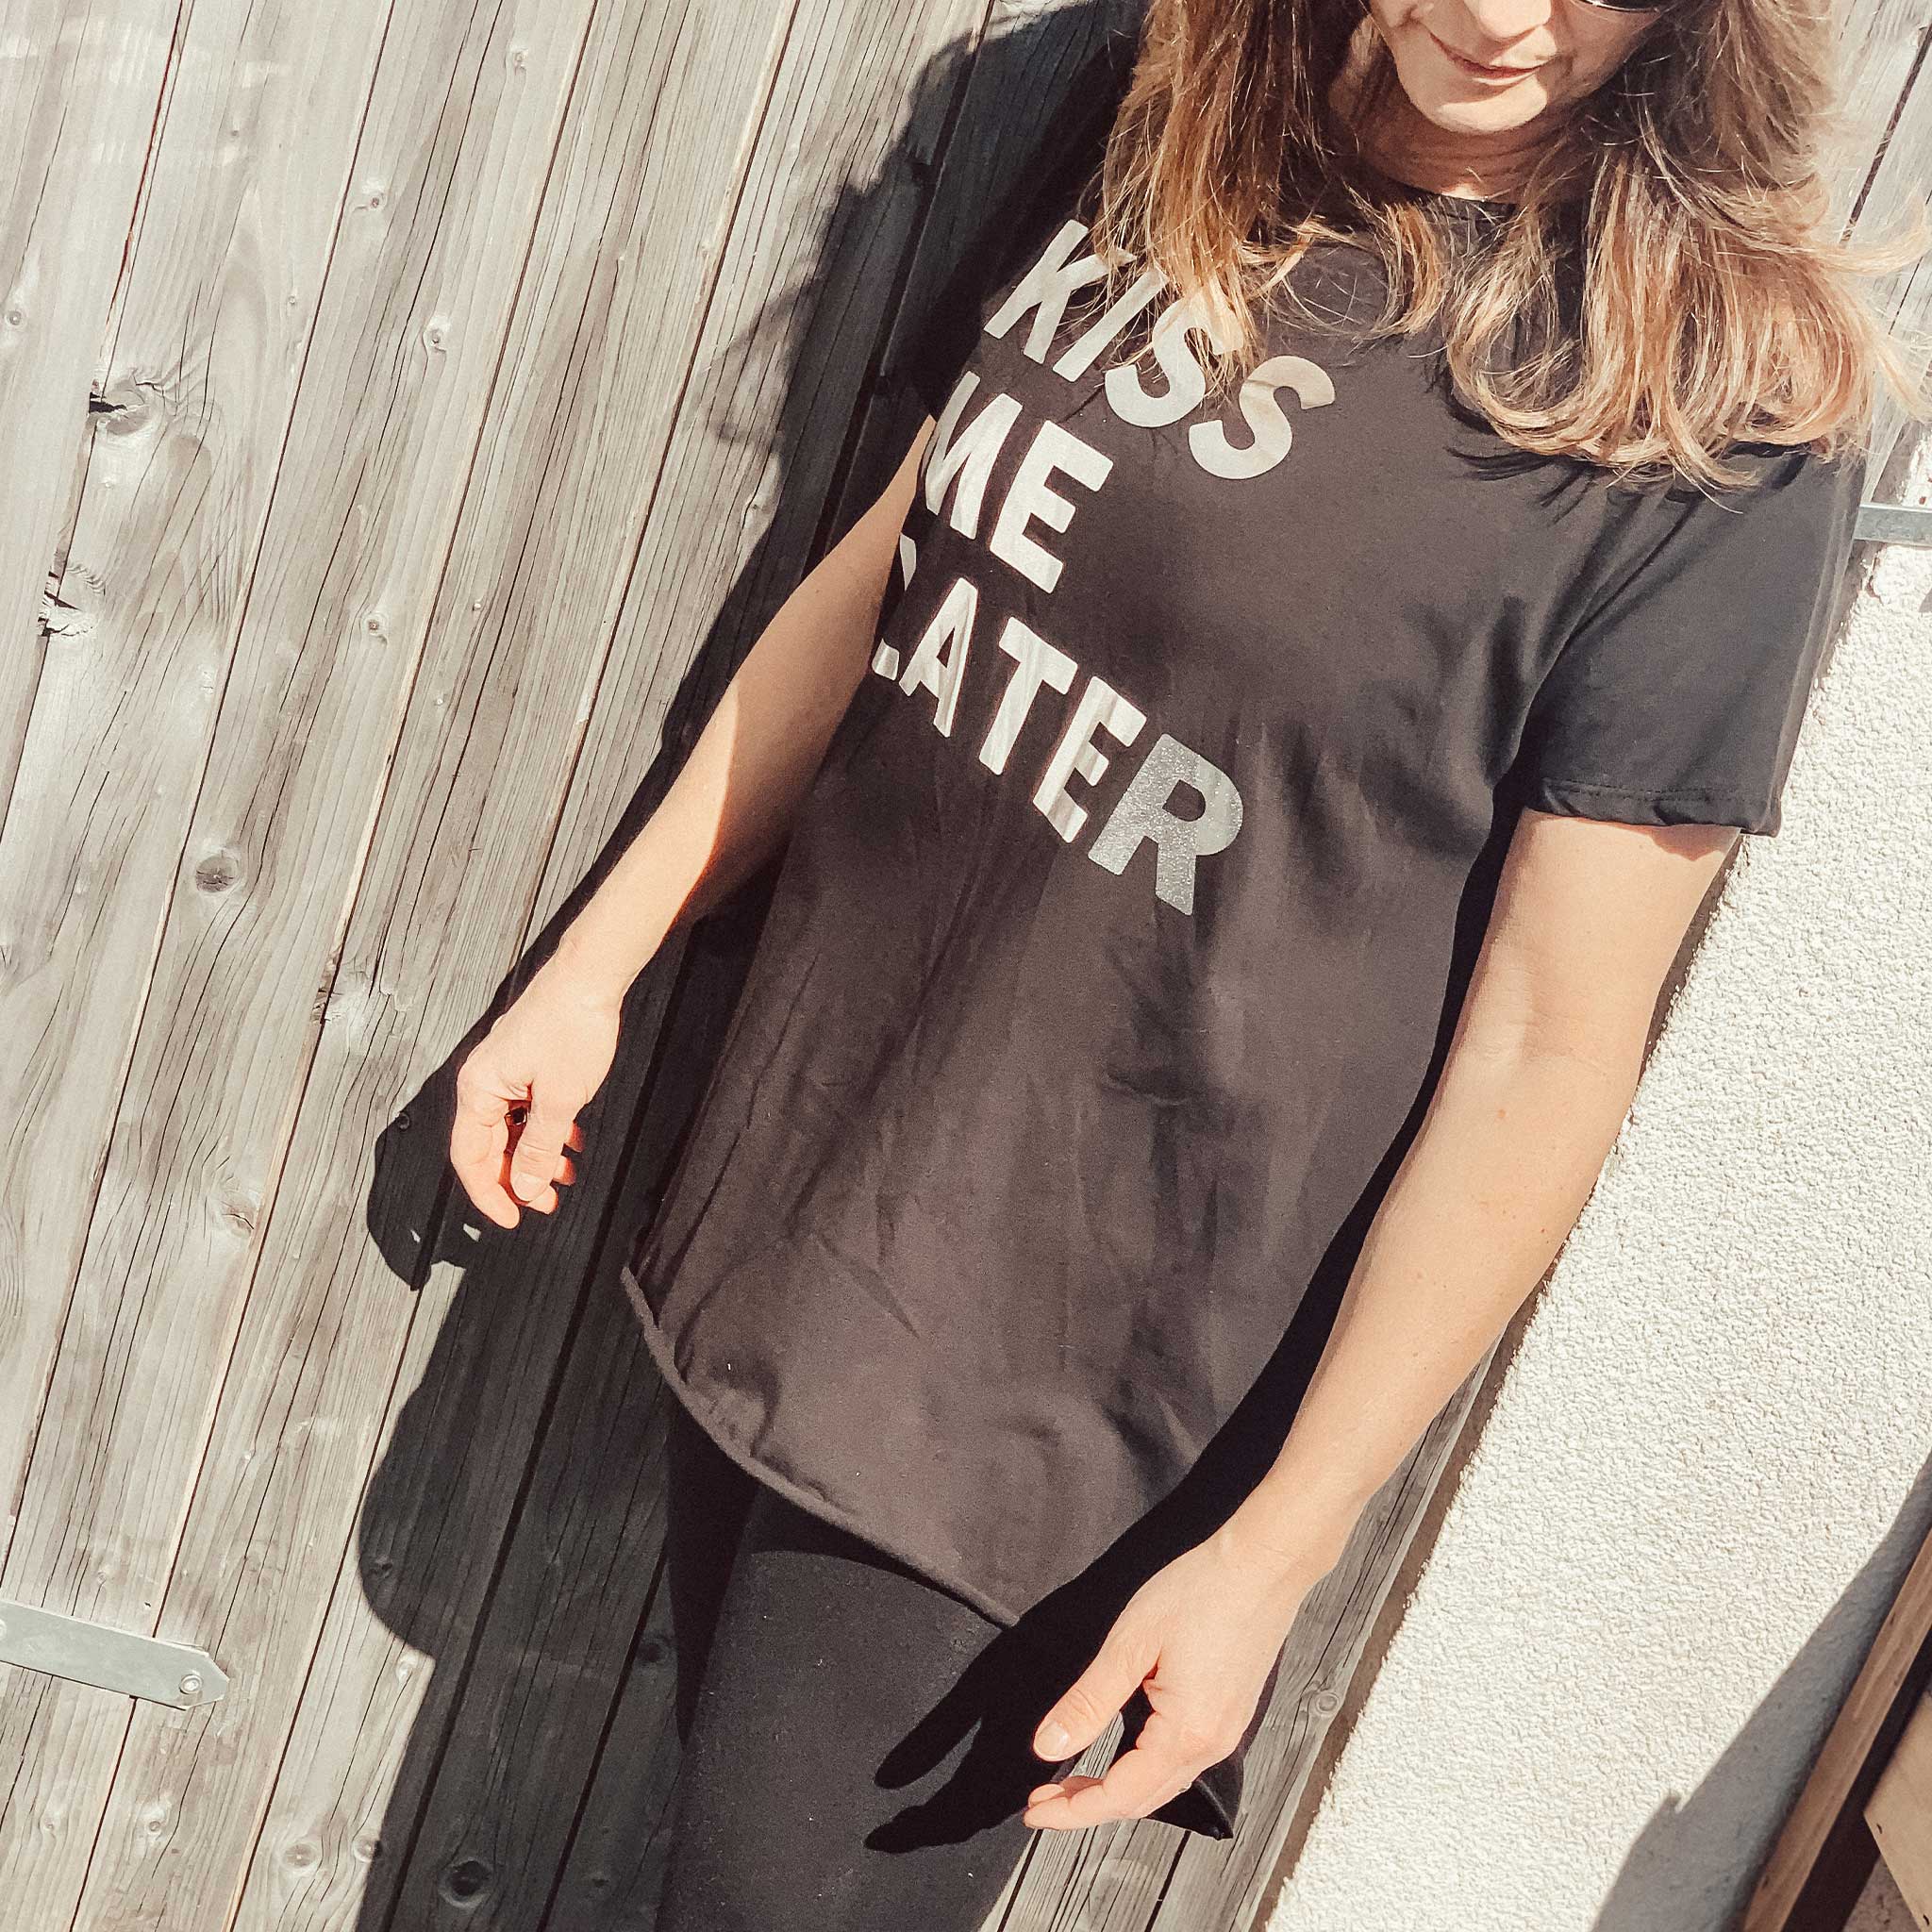 T-Shirt "Kiss me later" in Schwarz